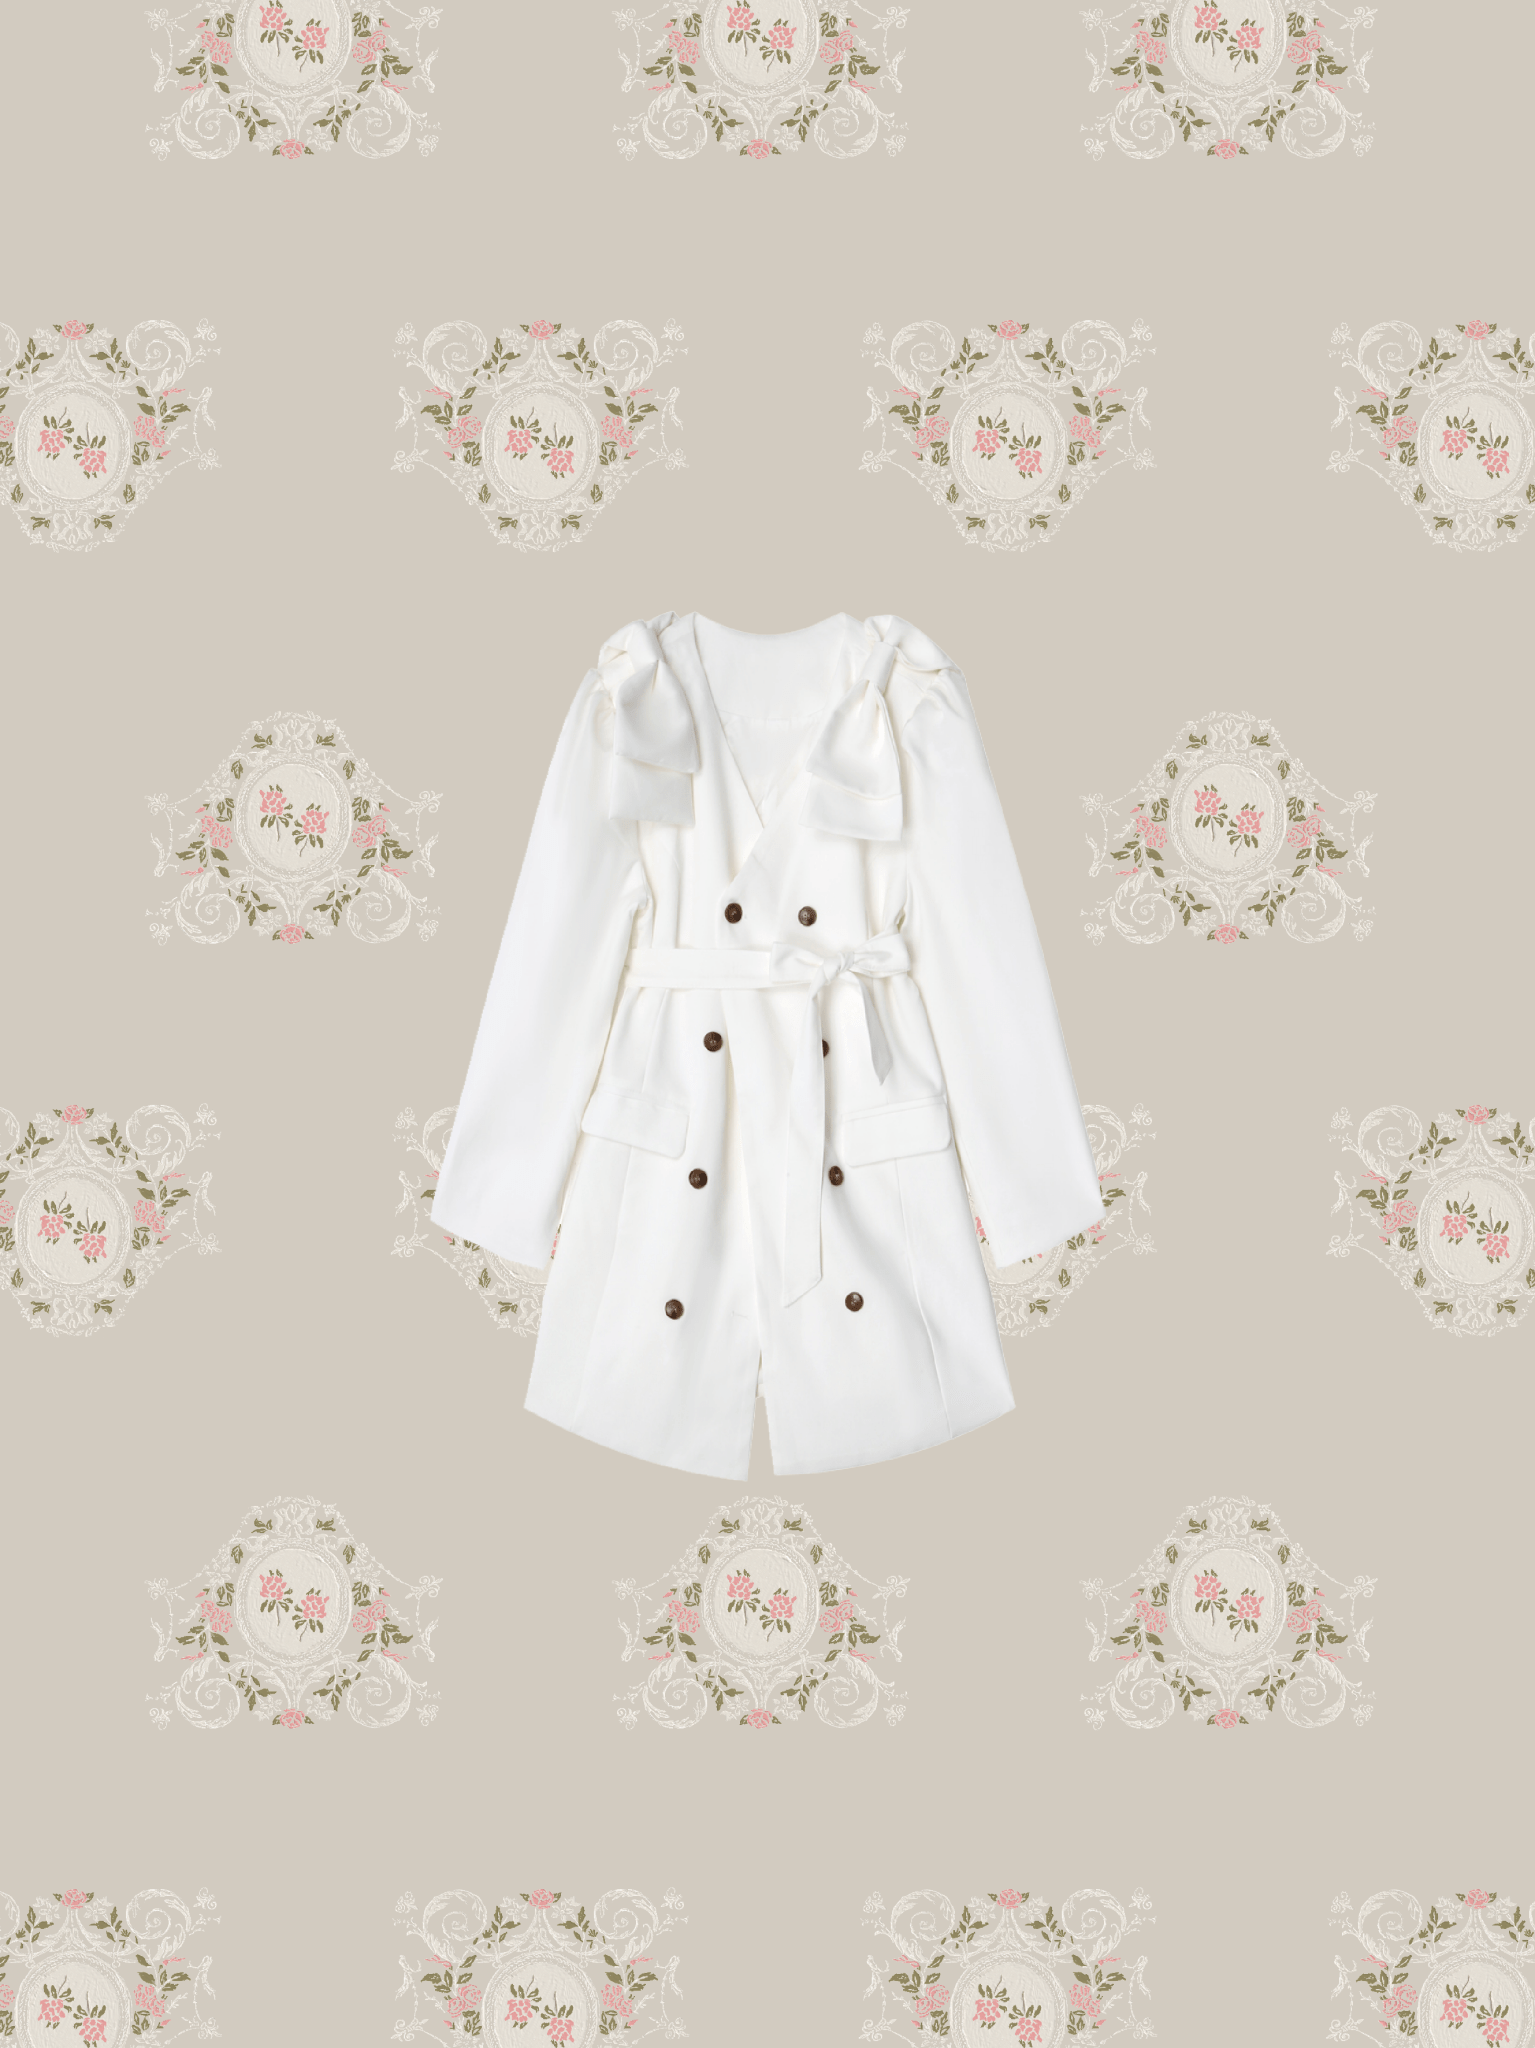 French Belted Suit Dress - LOVE POMME POMME